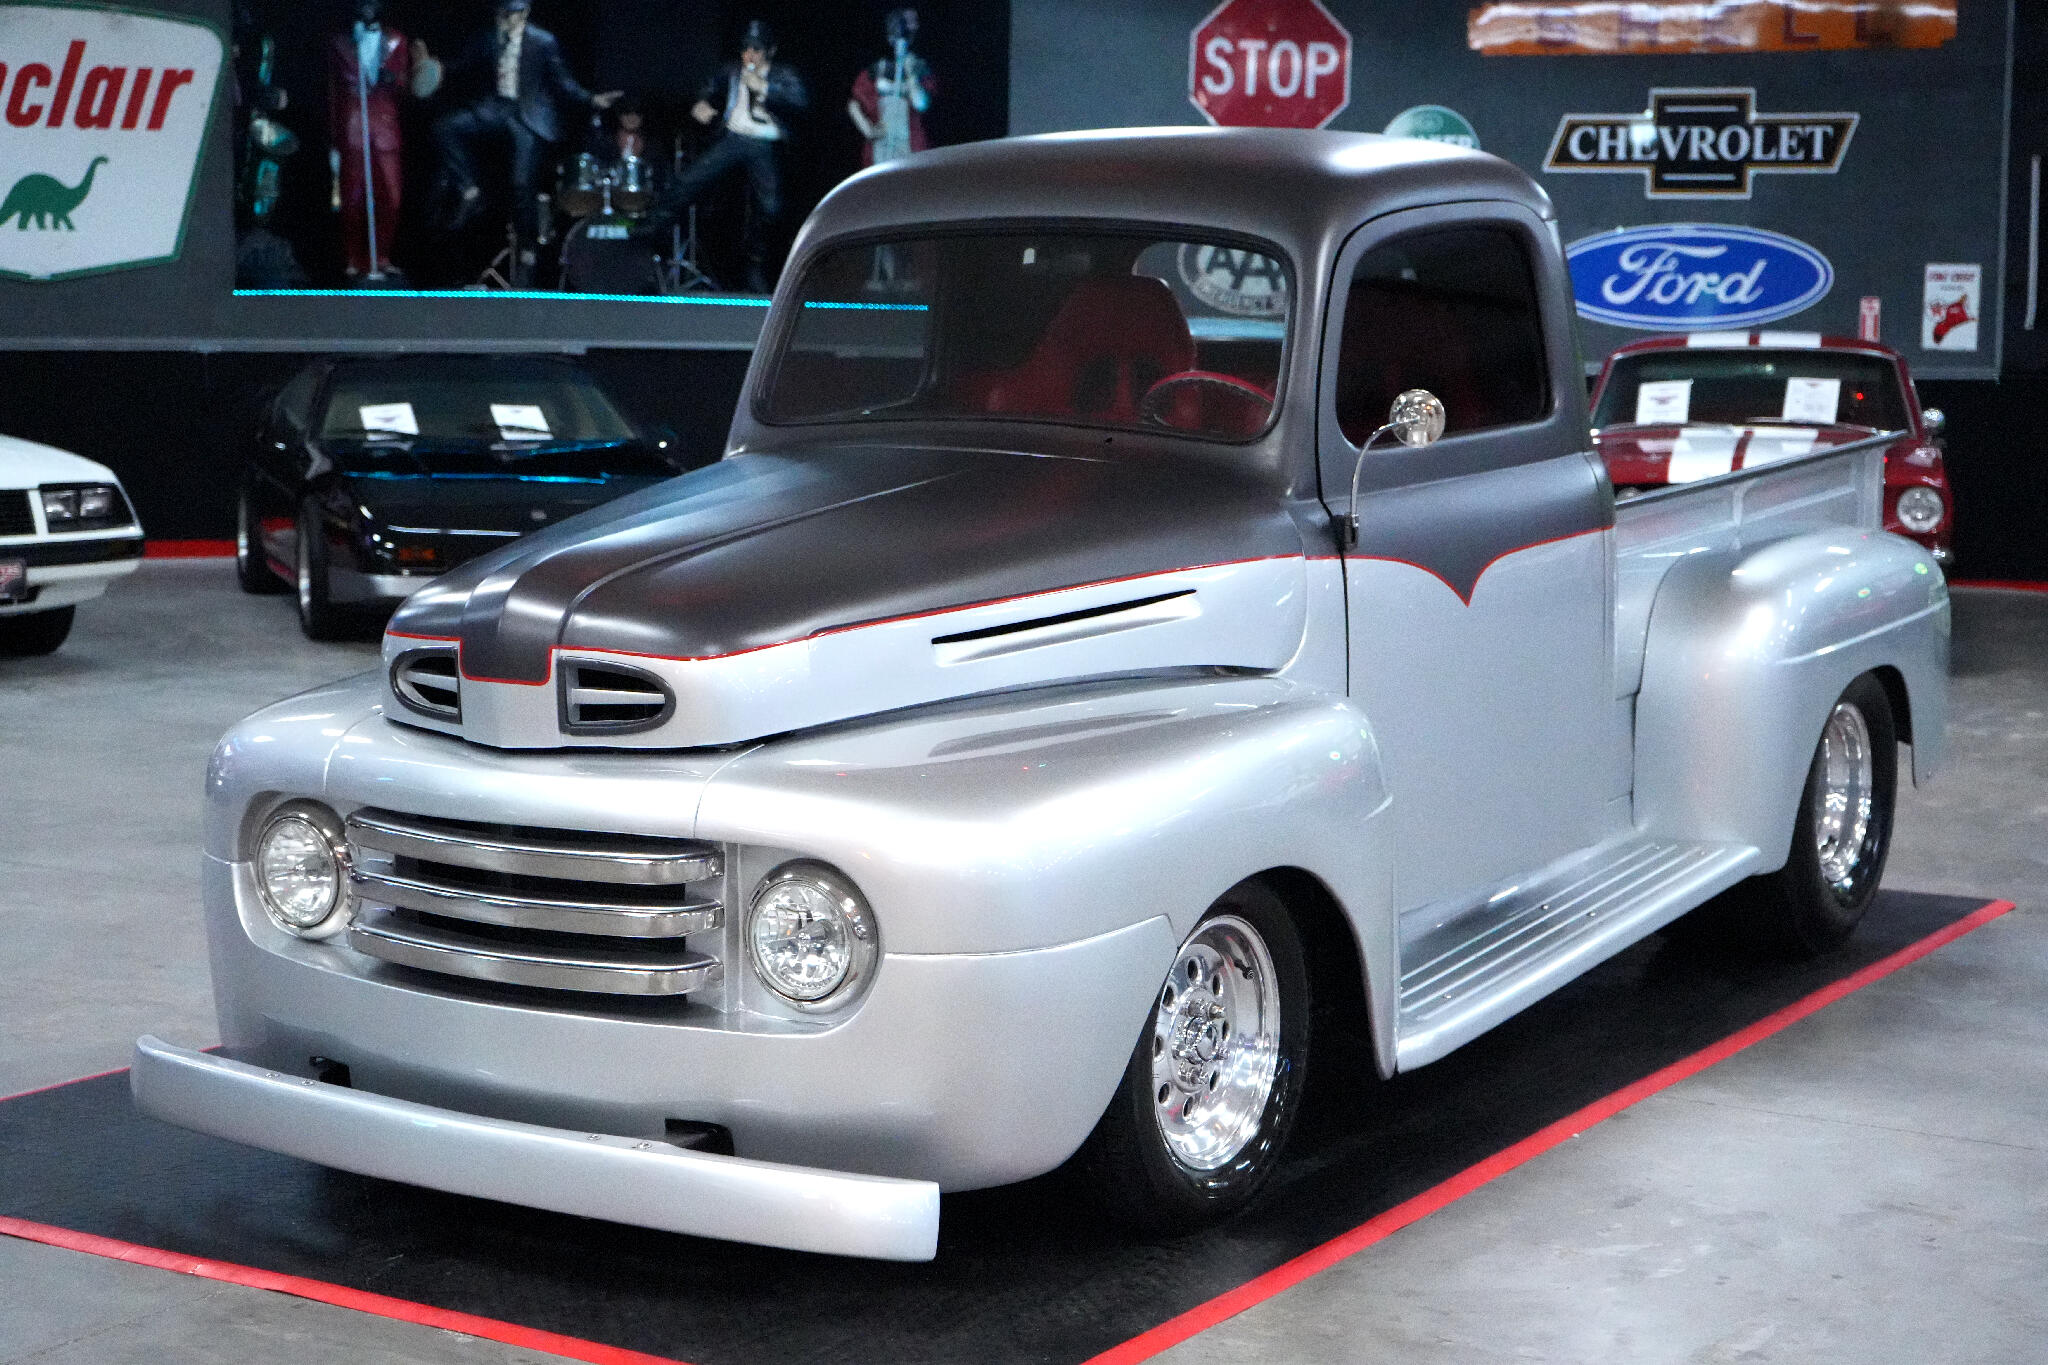 1949 Ford F-1 2